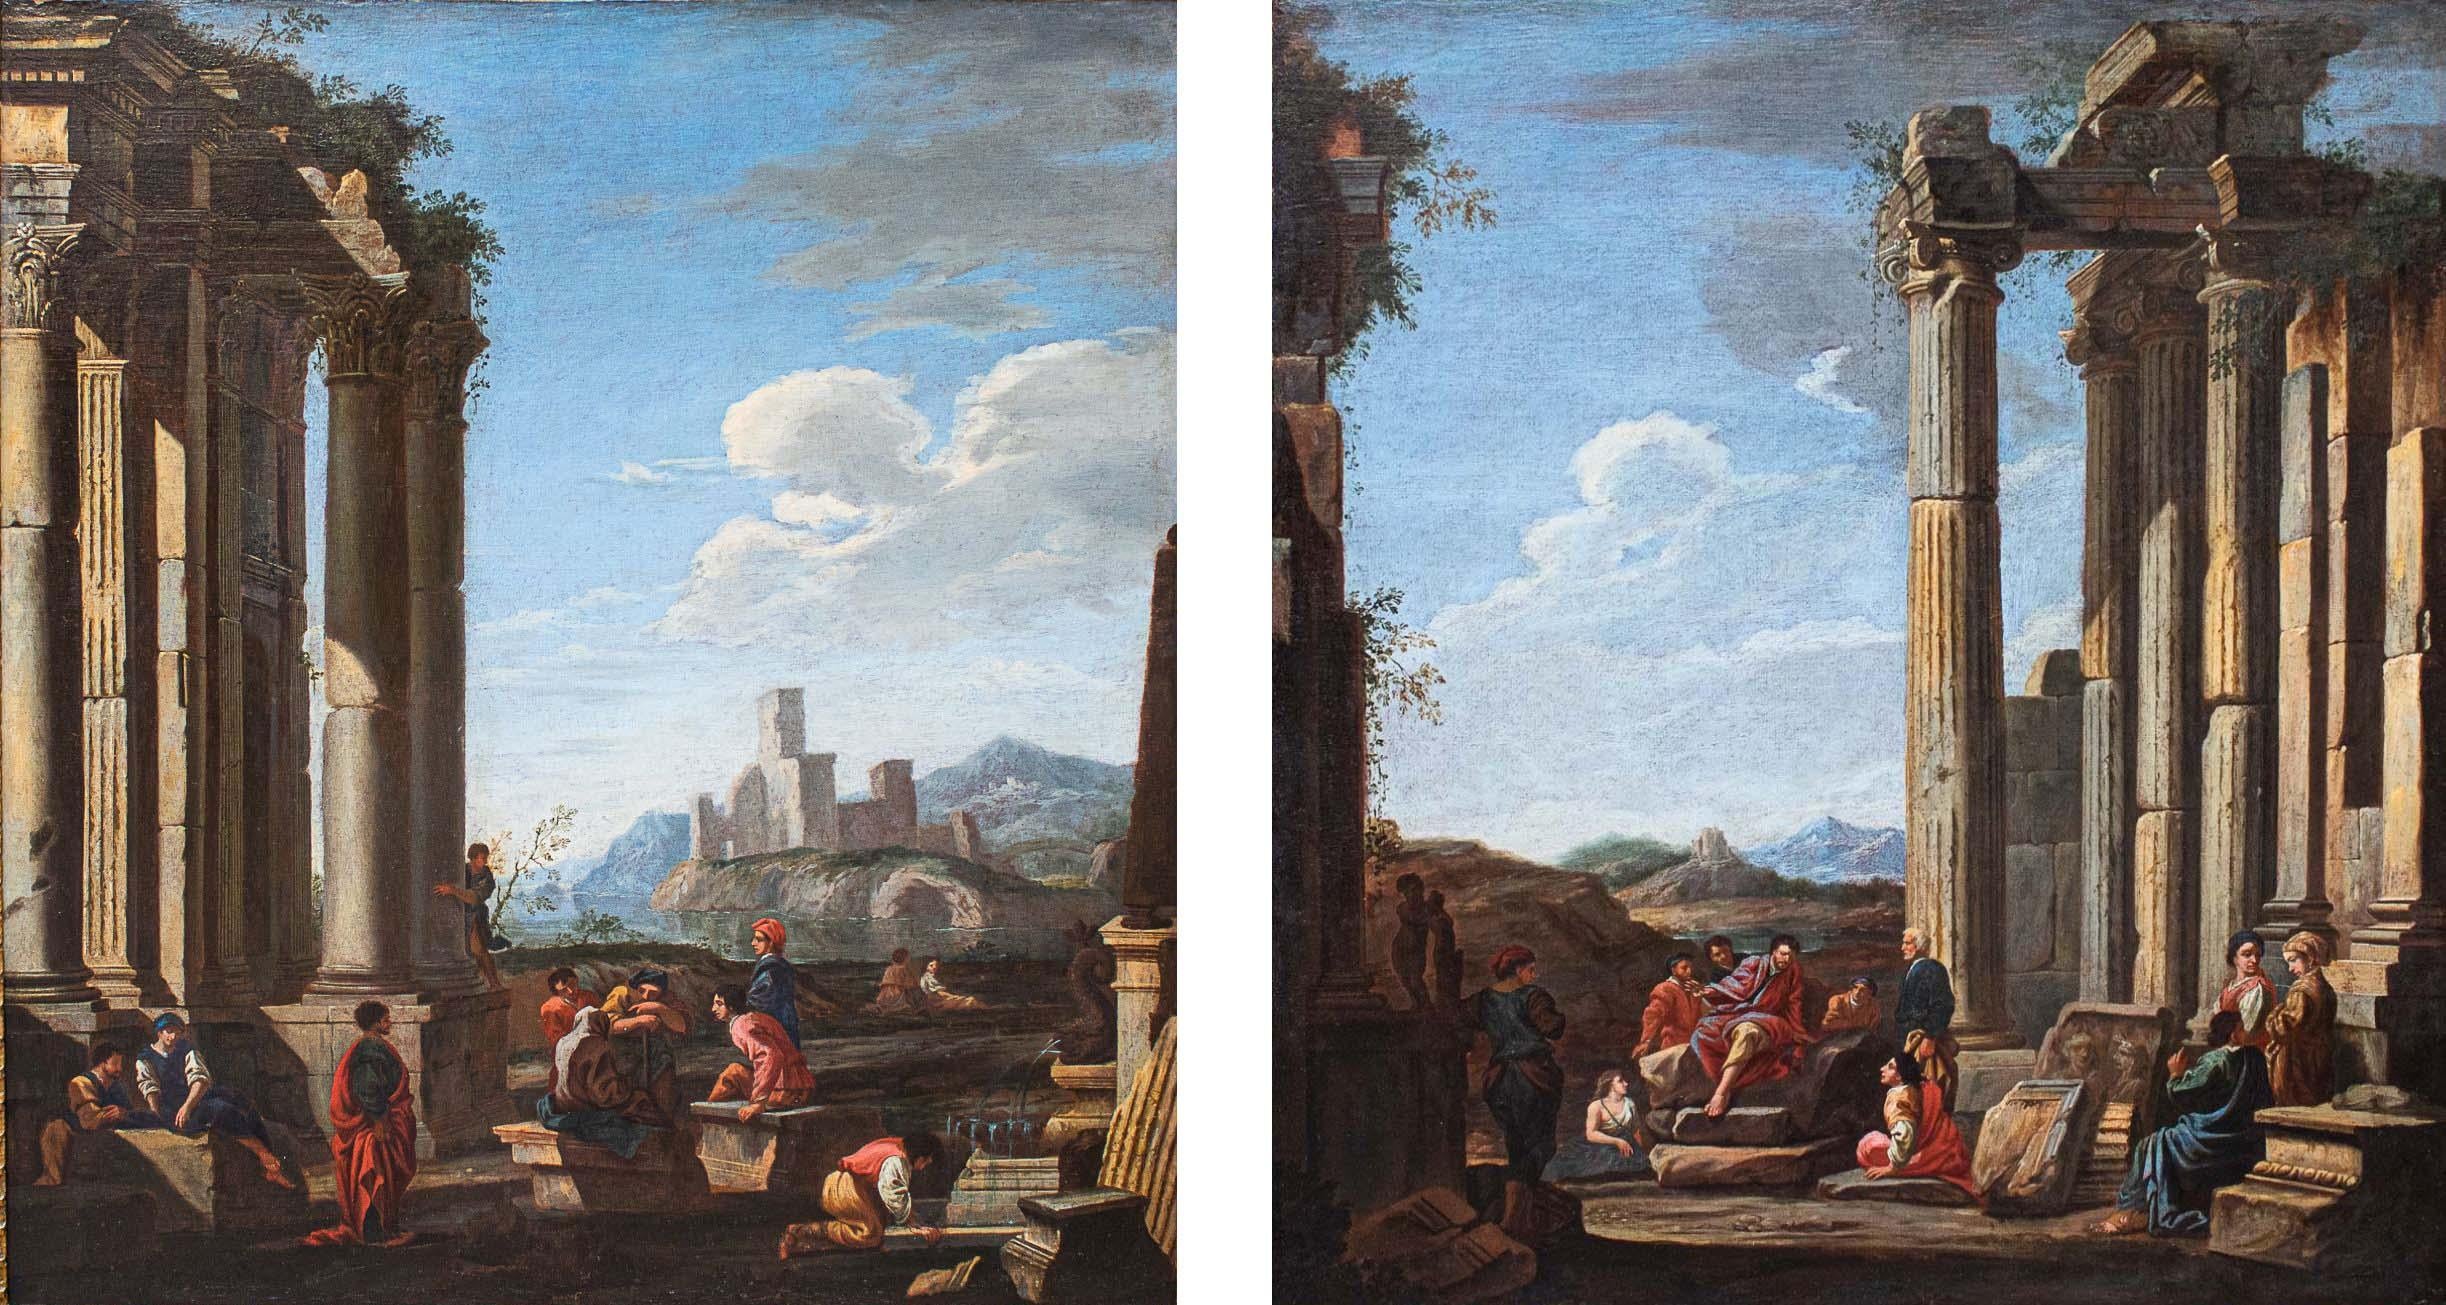 Domenico Roberti (Rome, 1642 - there, 1707)
Pair of whims with classical ruins and landscape view
(2) Oil on canvas, 102.5 x 89 cm - with frame 112 x 97.5 x 4.3 cm
Expertise Prof. Sestieri

The fascination of the antique is revealed in the